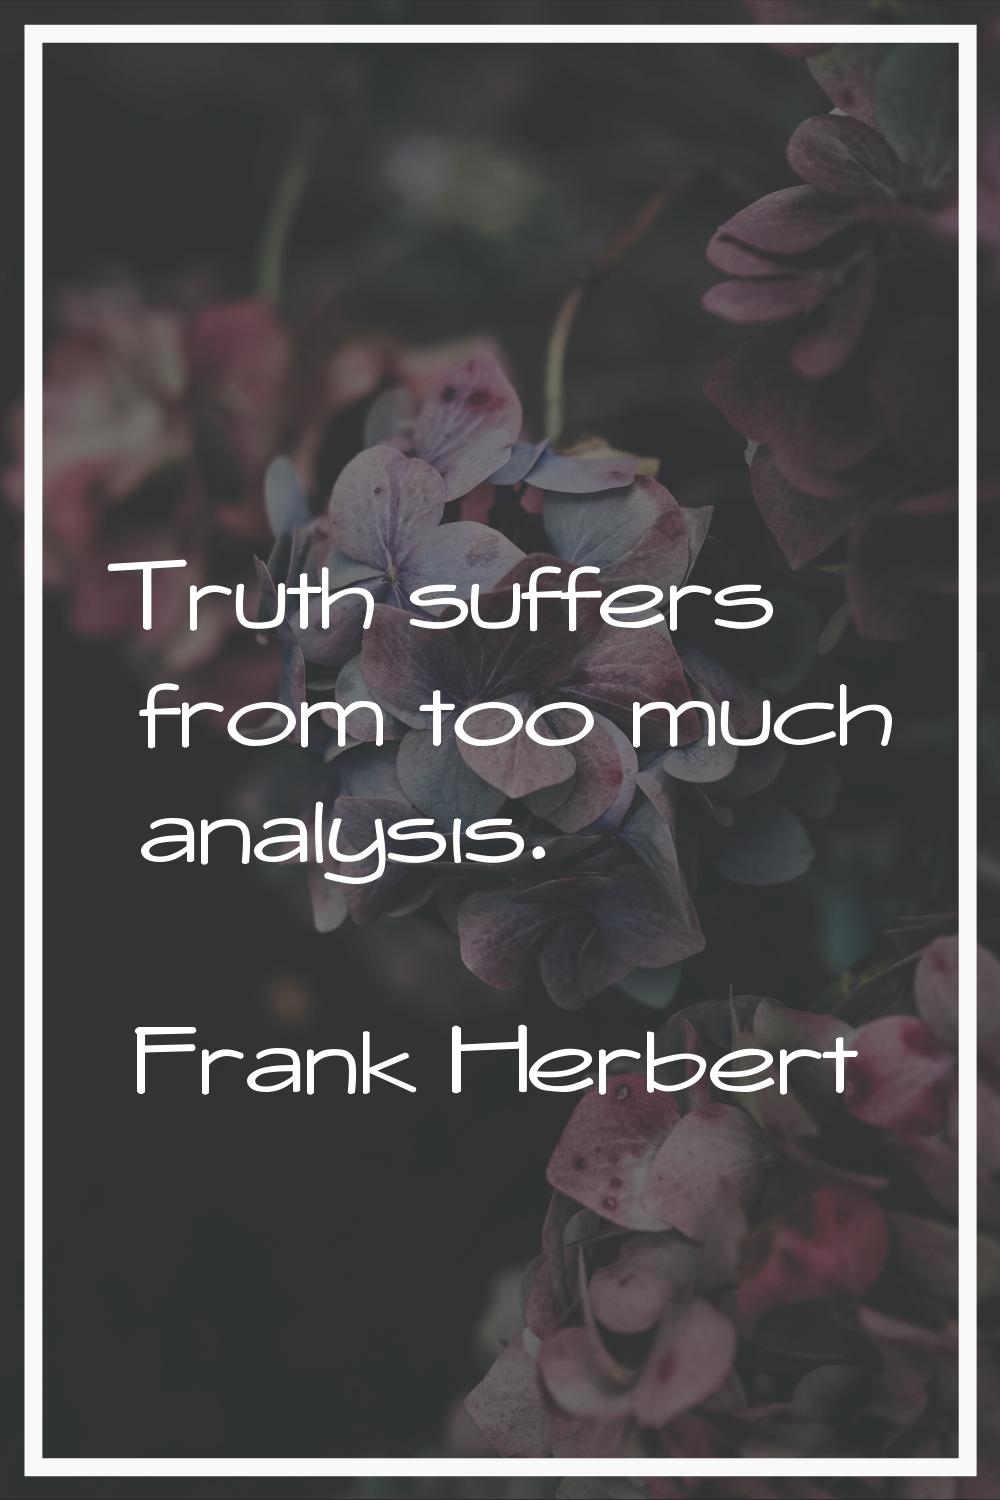 Truth suffers from too much analysis.